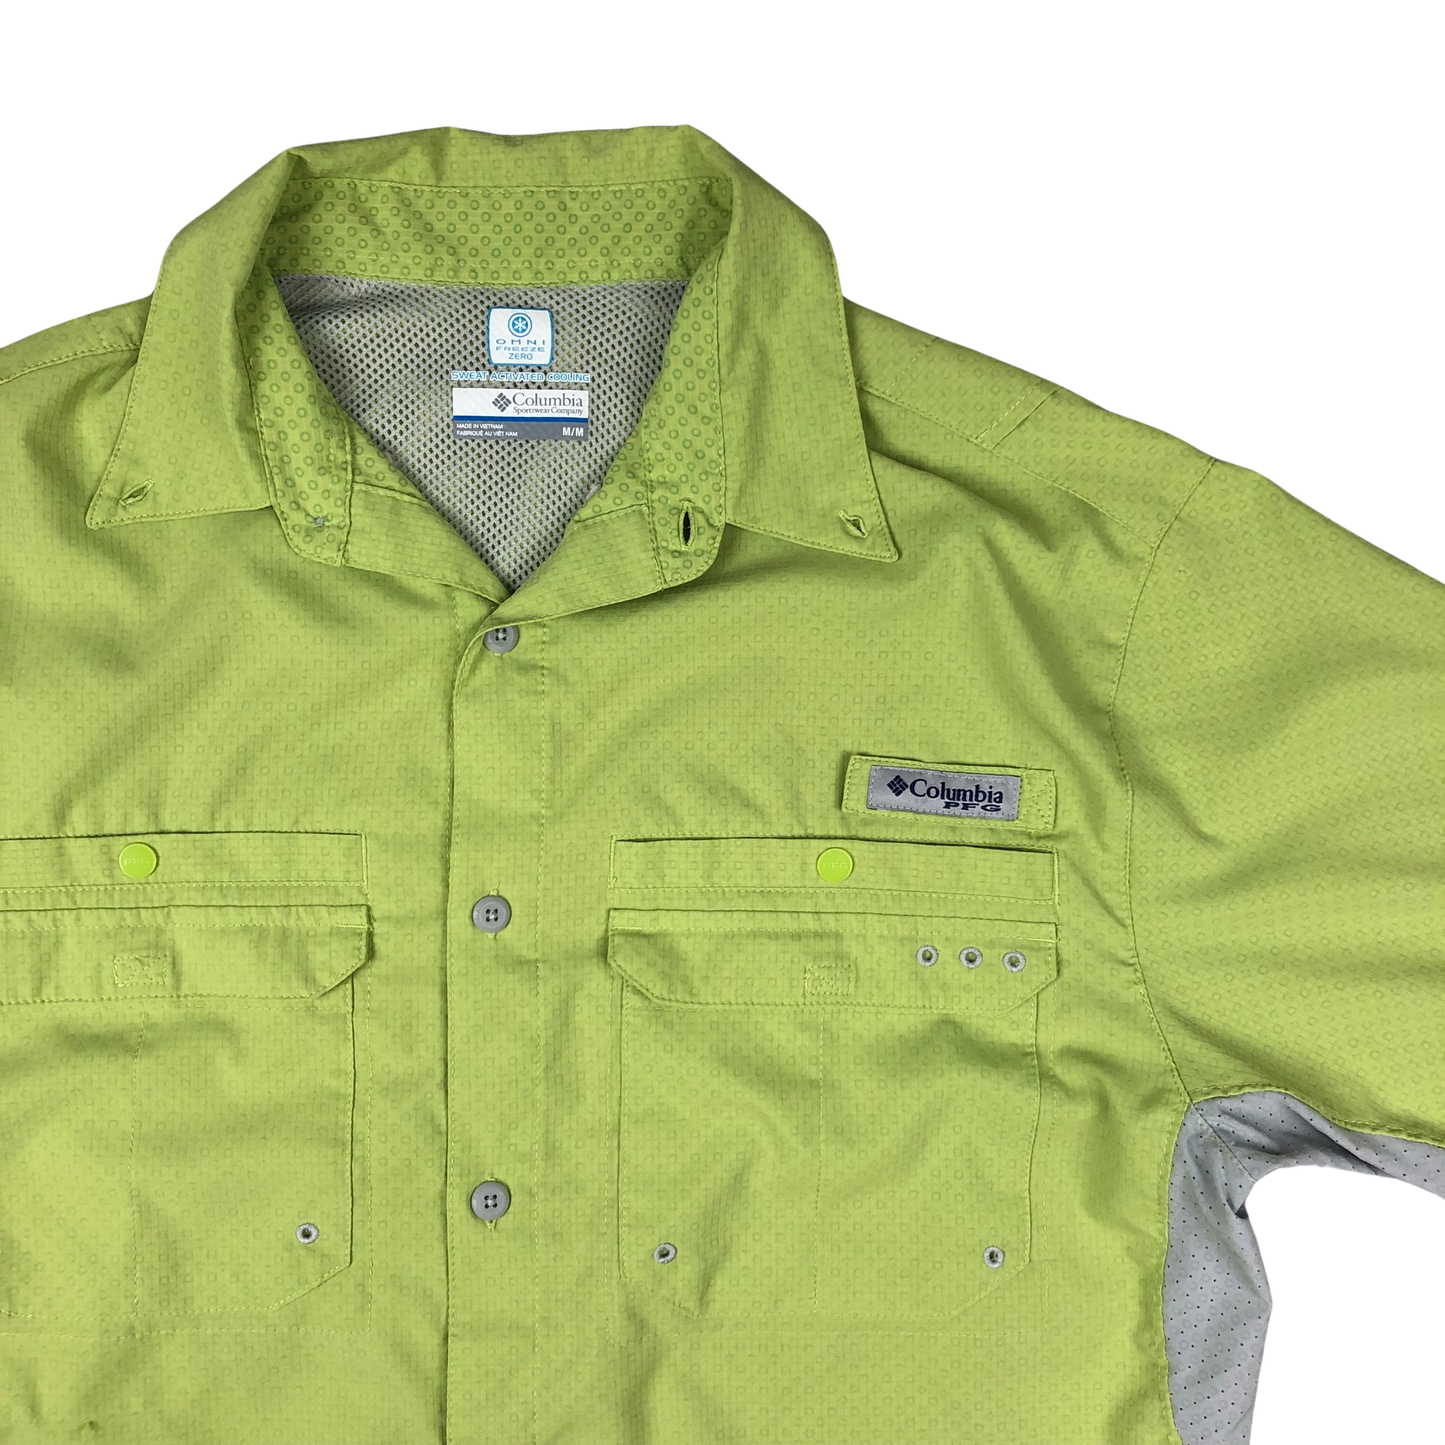 Preloved Columbia Technical Lime Green Shirt